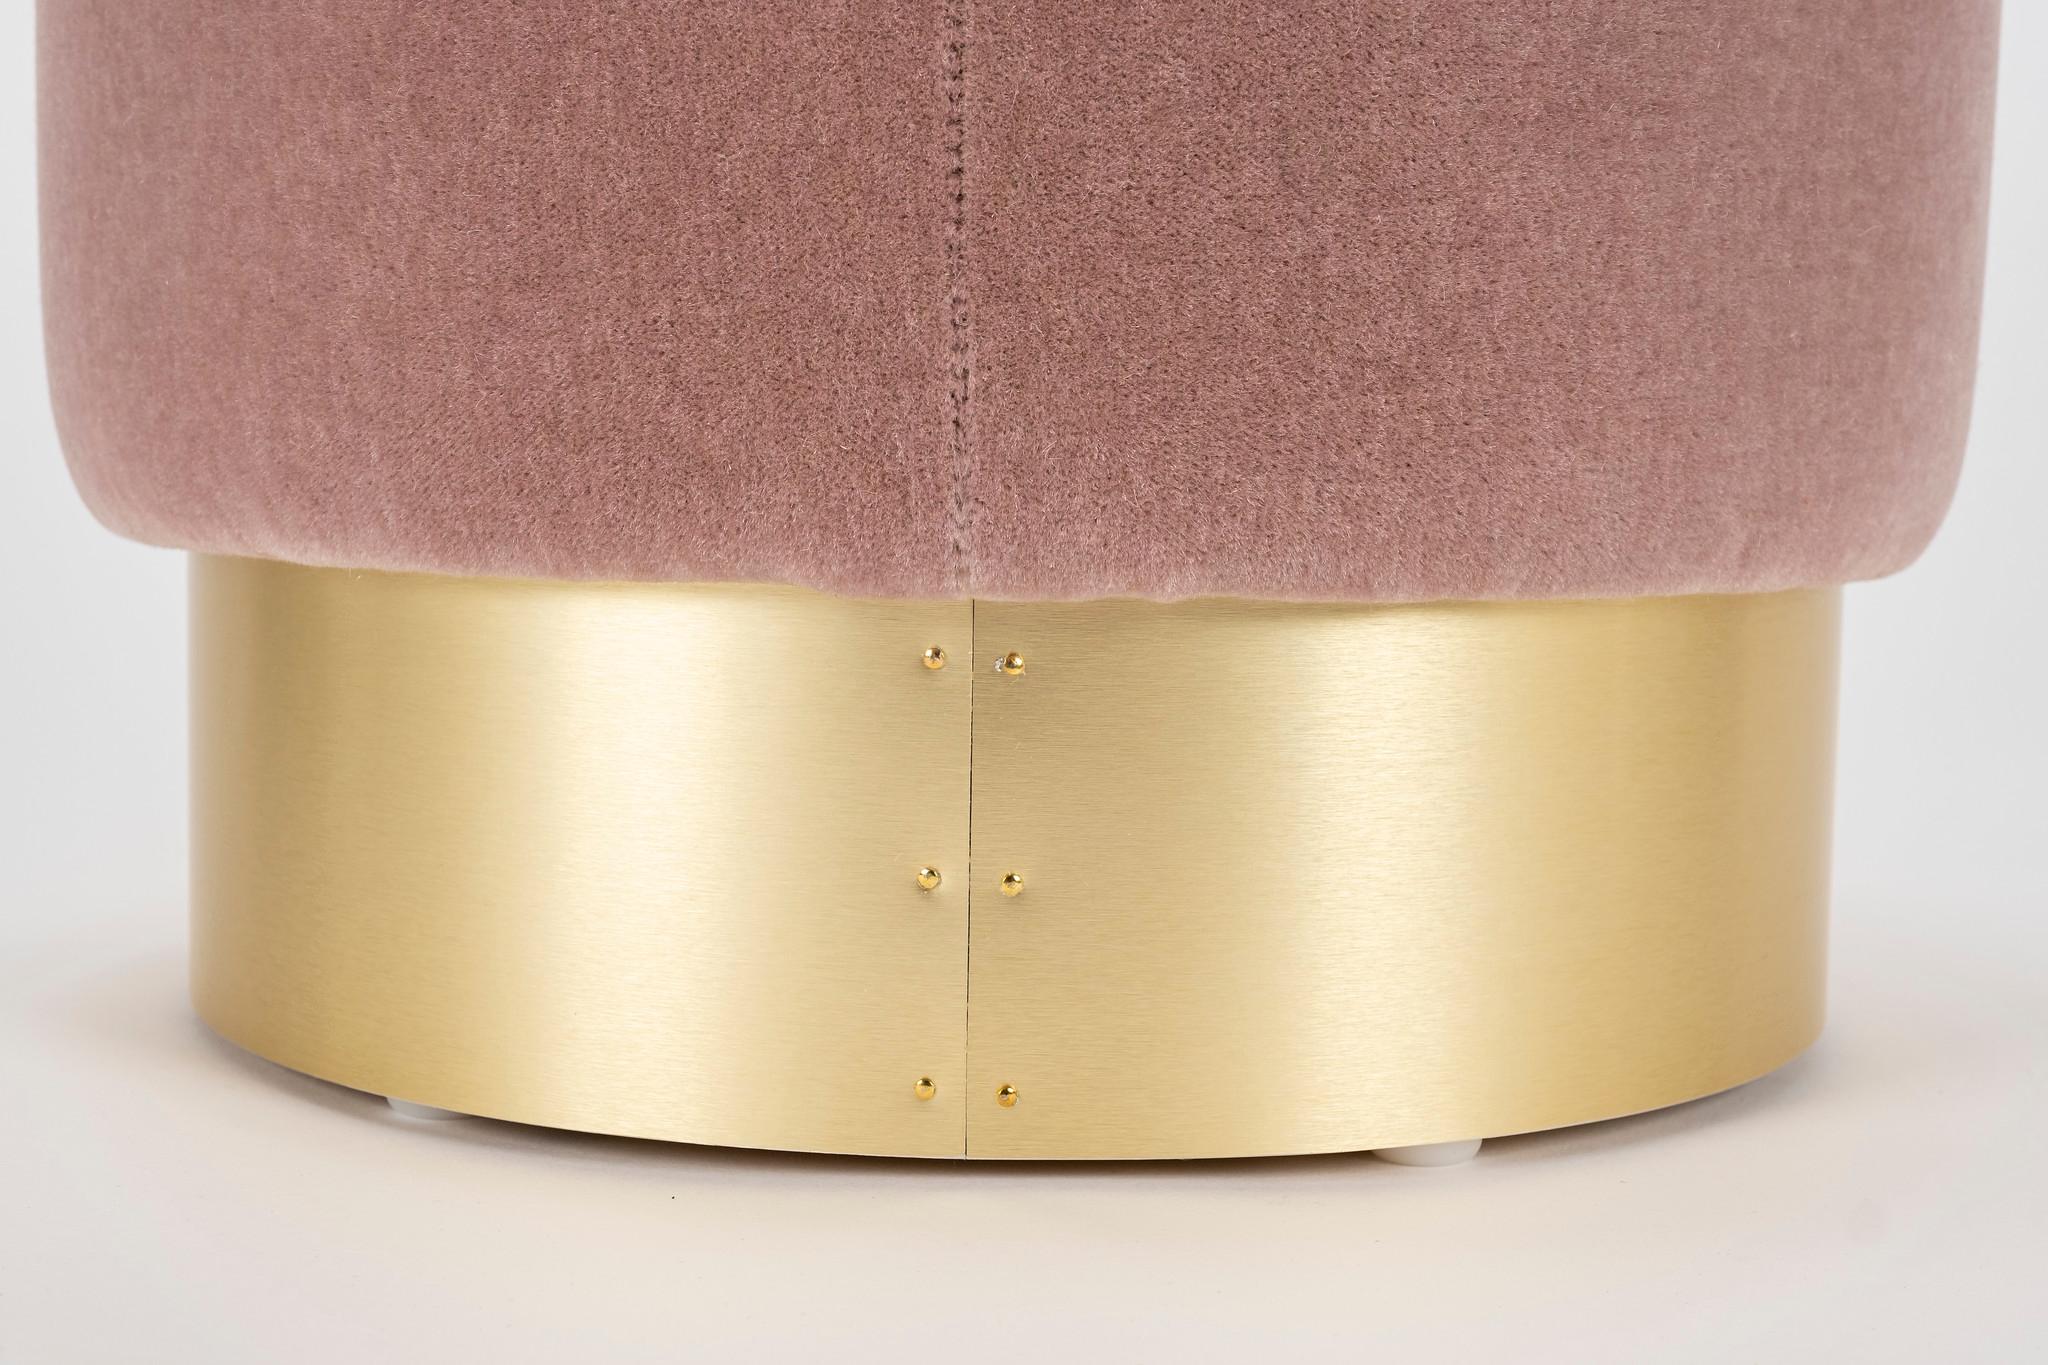 A pair of custom pink (rose or faded mauve) contemporary pouf seats with brass bases, also available C.O.M.